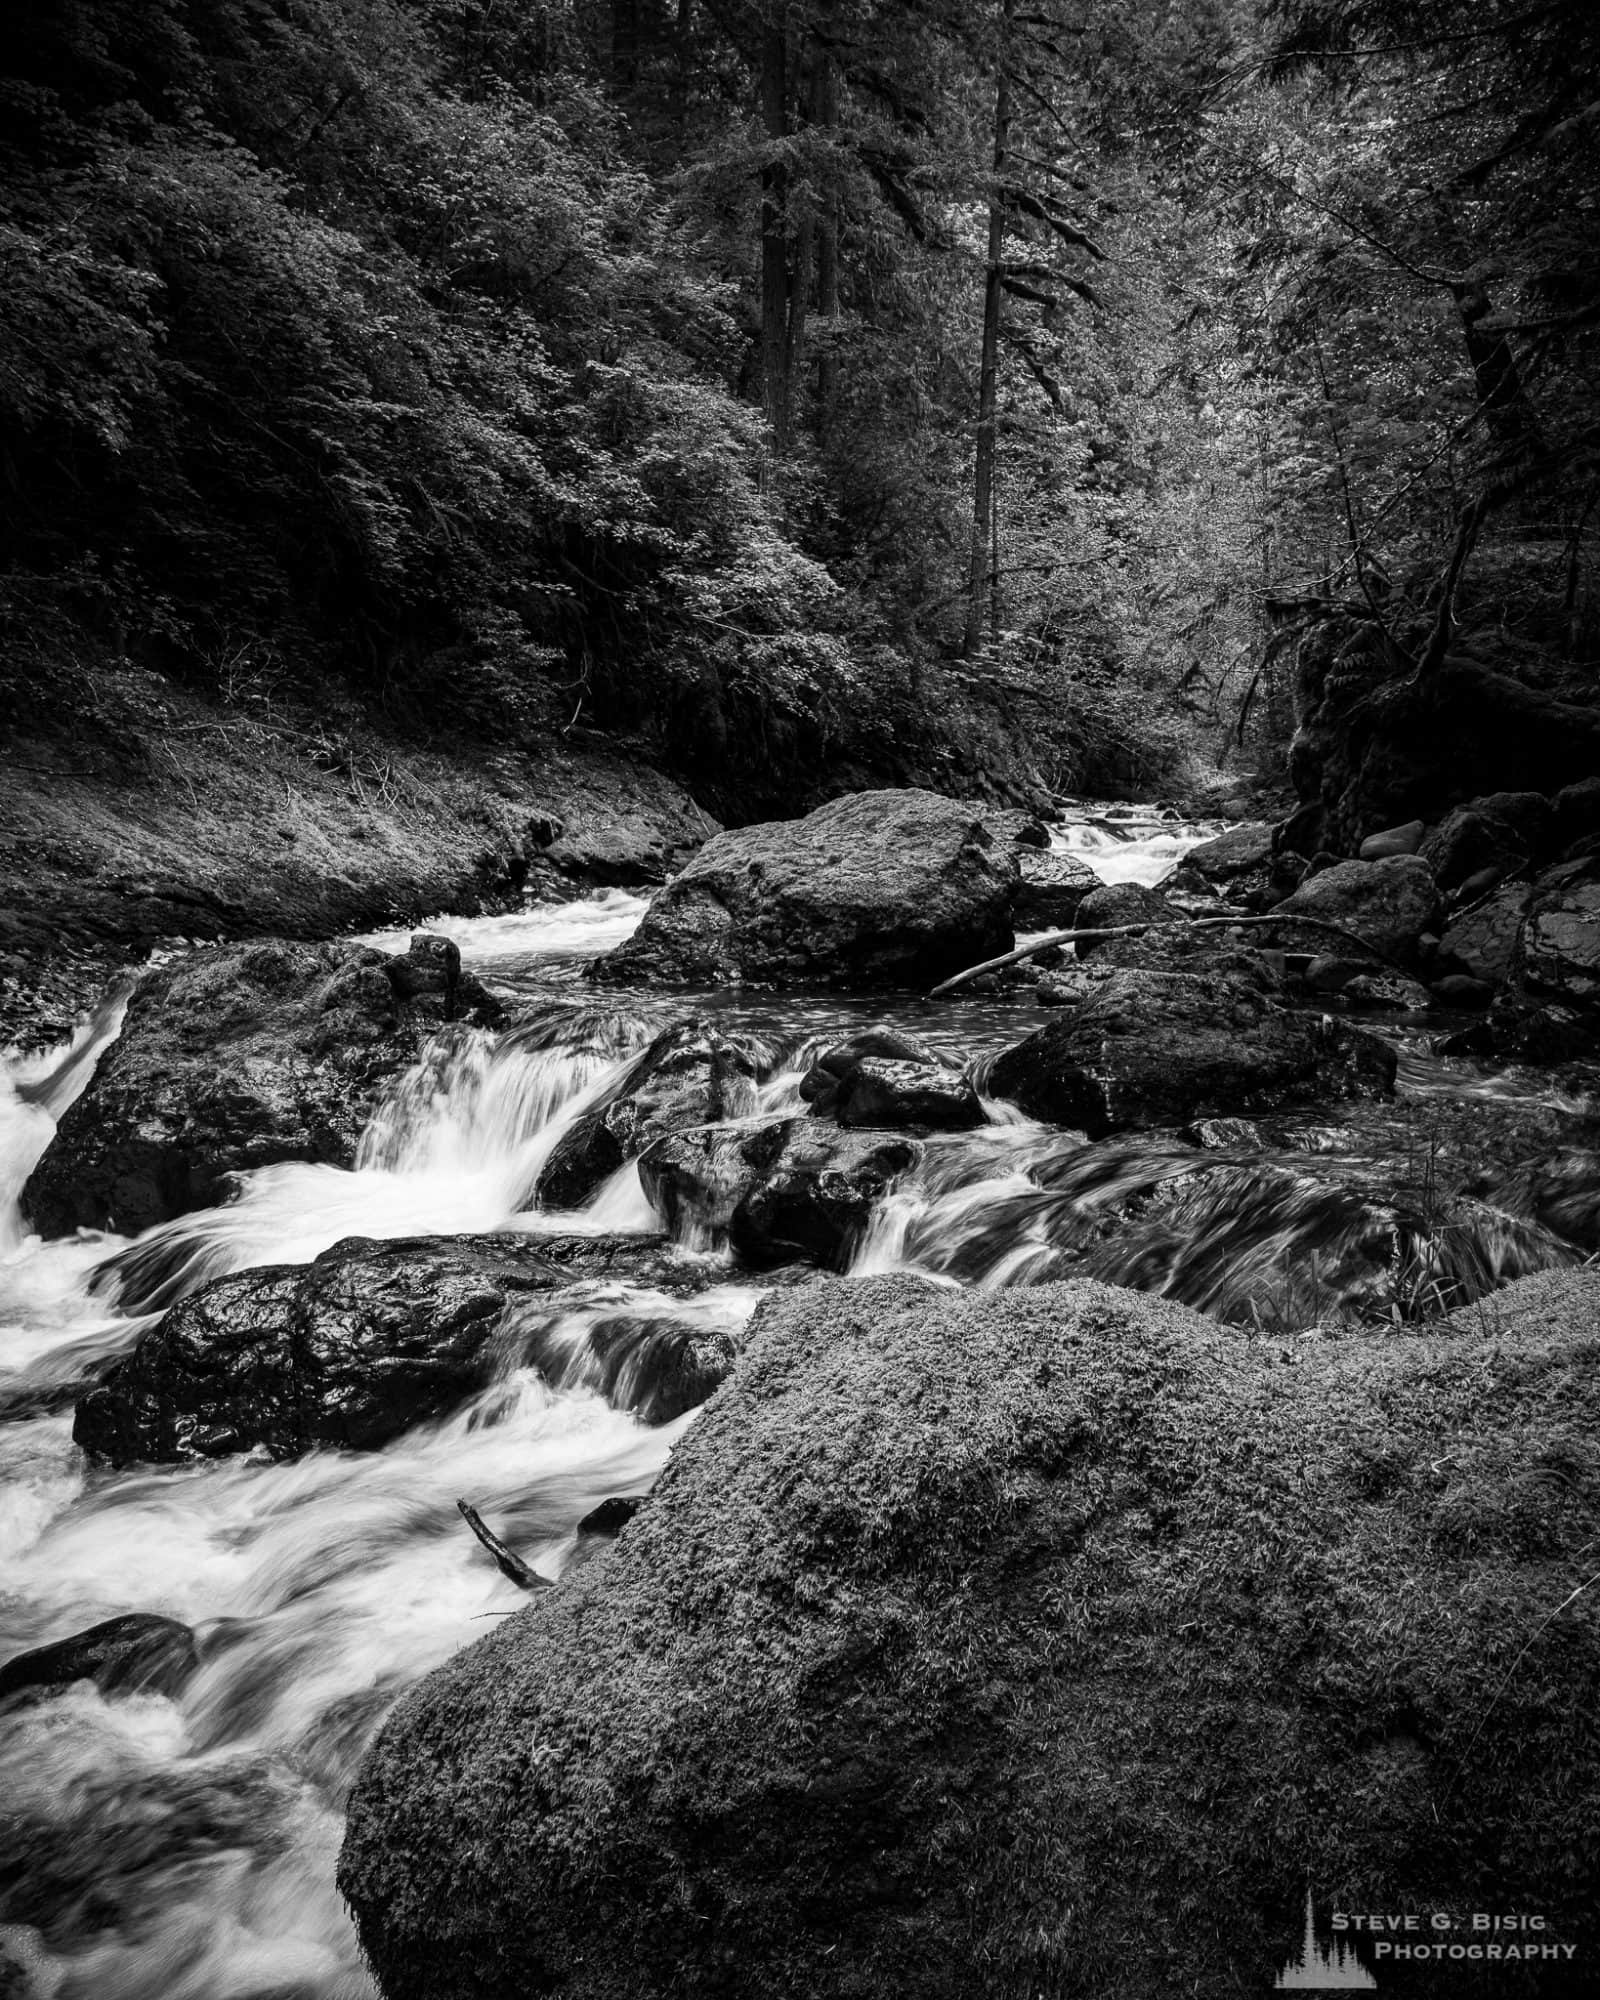 A black and white landscape photograph of a rocky stream bed found along Forest Road 52 (Skate Creek Road) in the Gifford Pinchot National Forest, Washington.